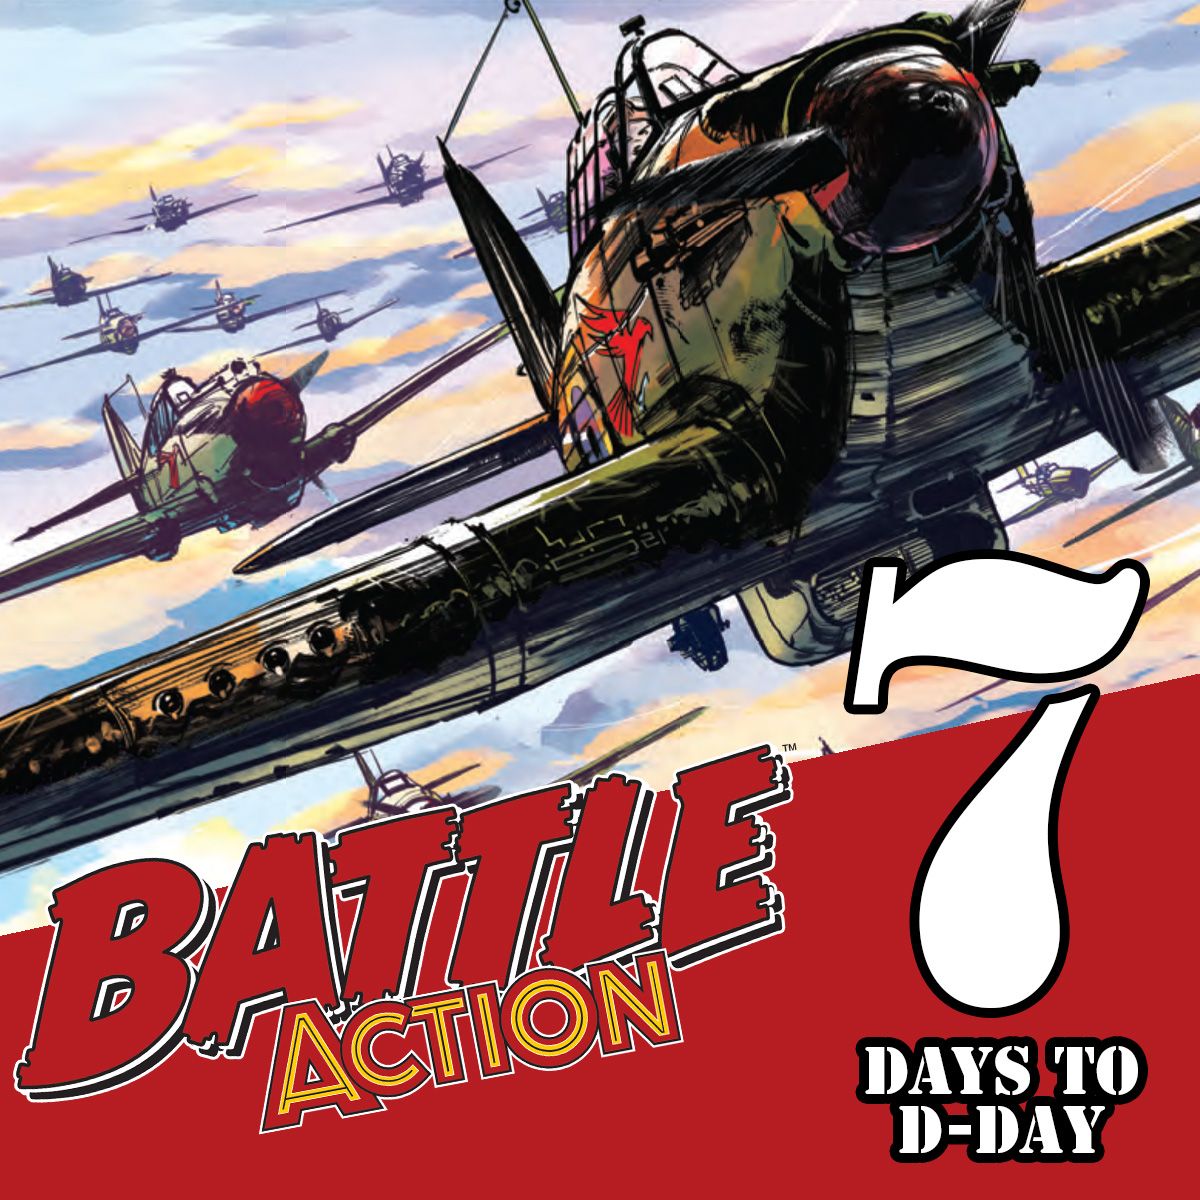 7 Days to Battle Action: meet Johnny Red and Skreamer of the Stukas!